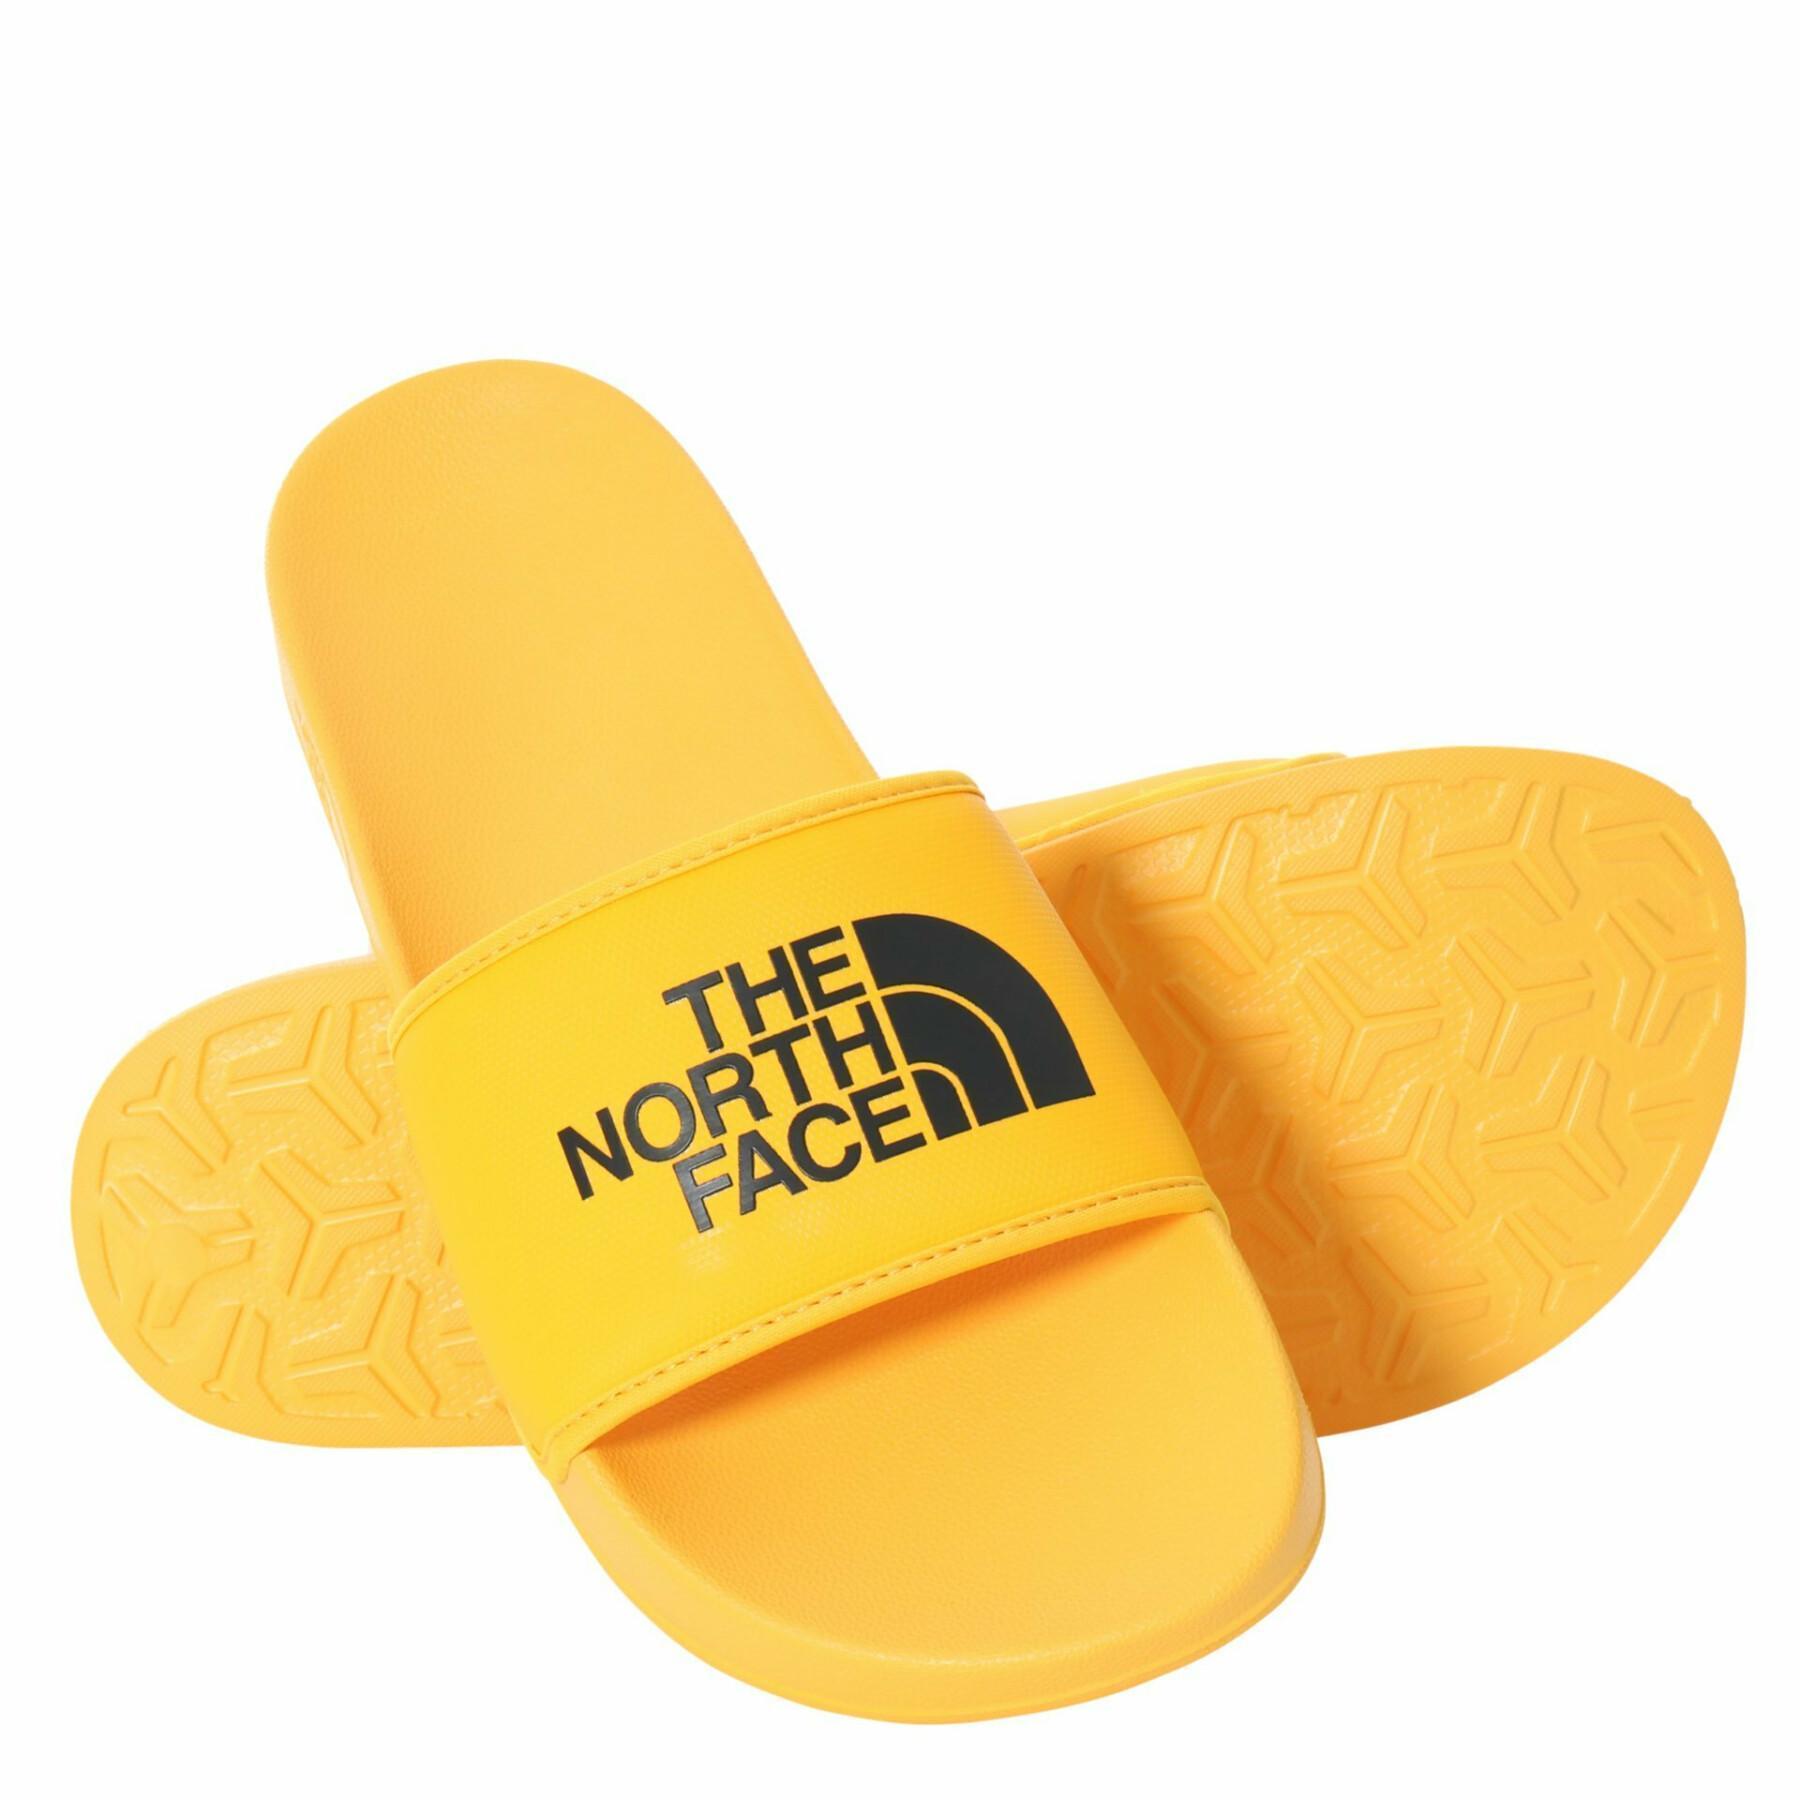 Tap shoes The North Face Base Camp Slide III